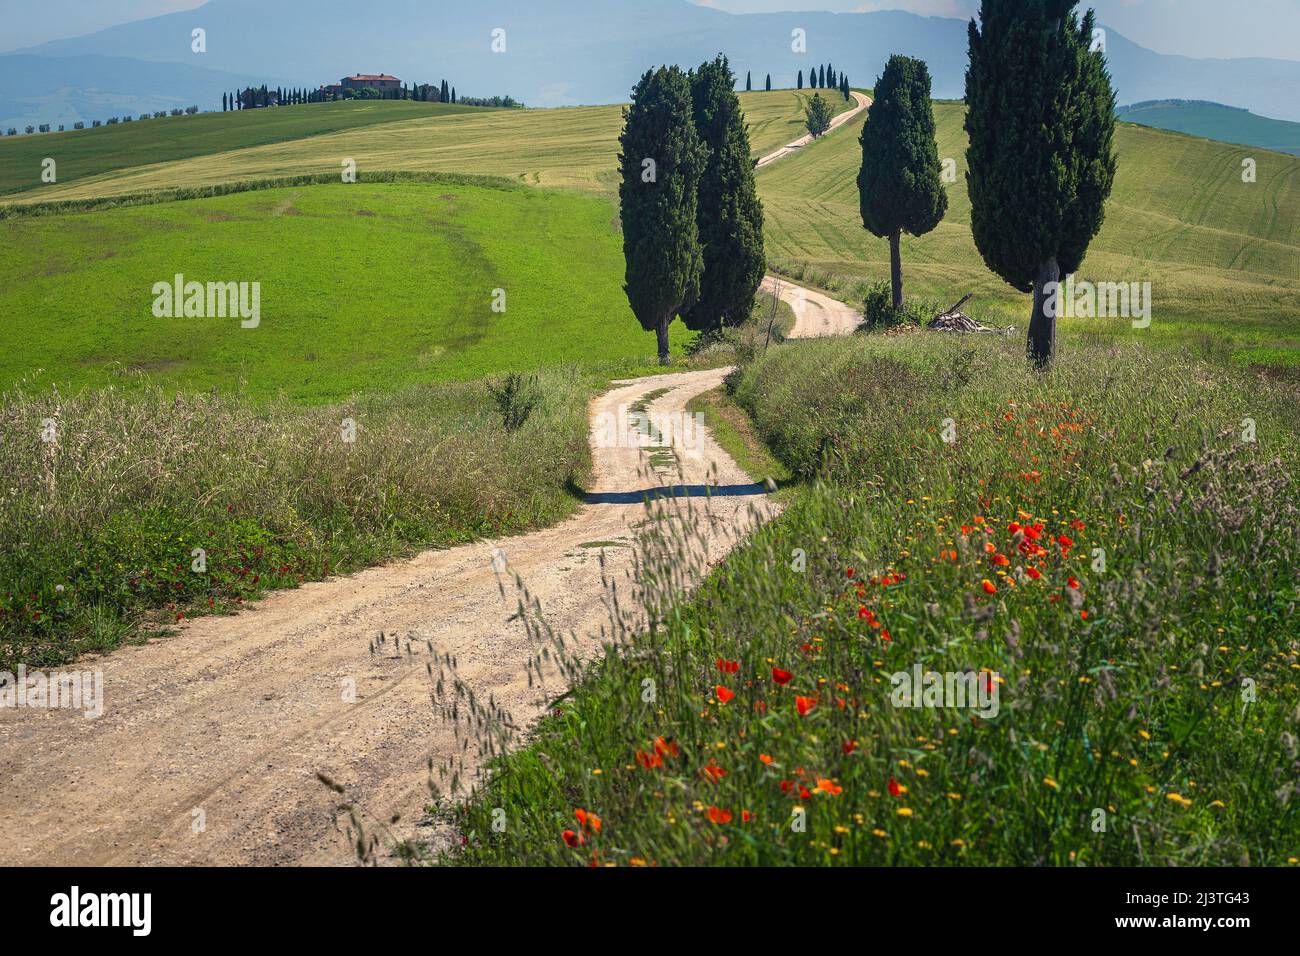 Majestic real Tuscany summer scenery with agricultural grain fields and winding rural dusty road, Pienza, Tuscany, Italy, Europe Stock Photo